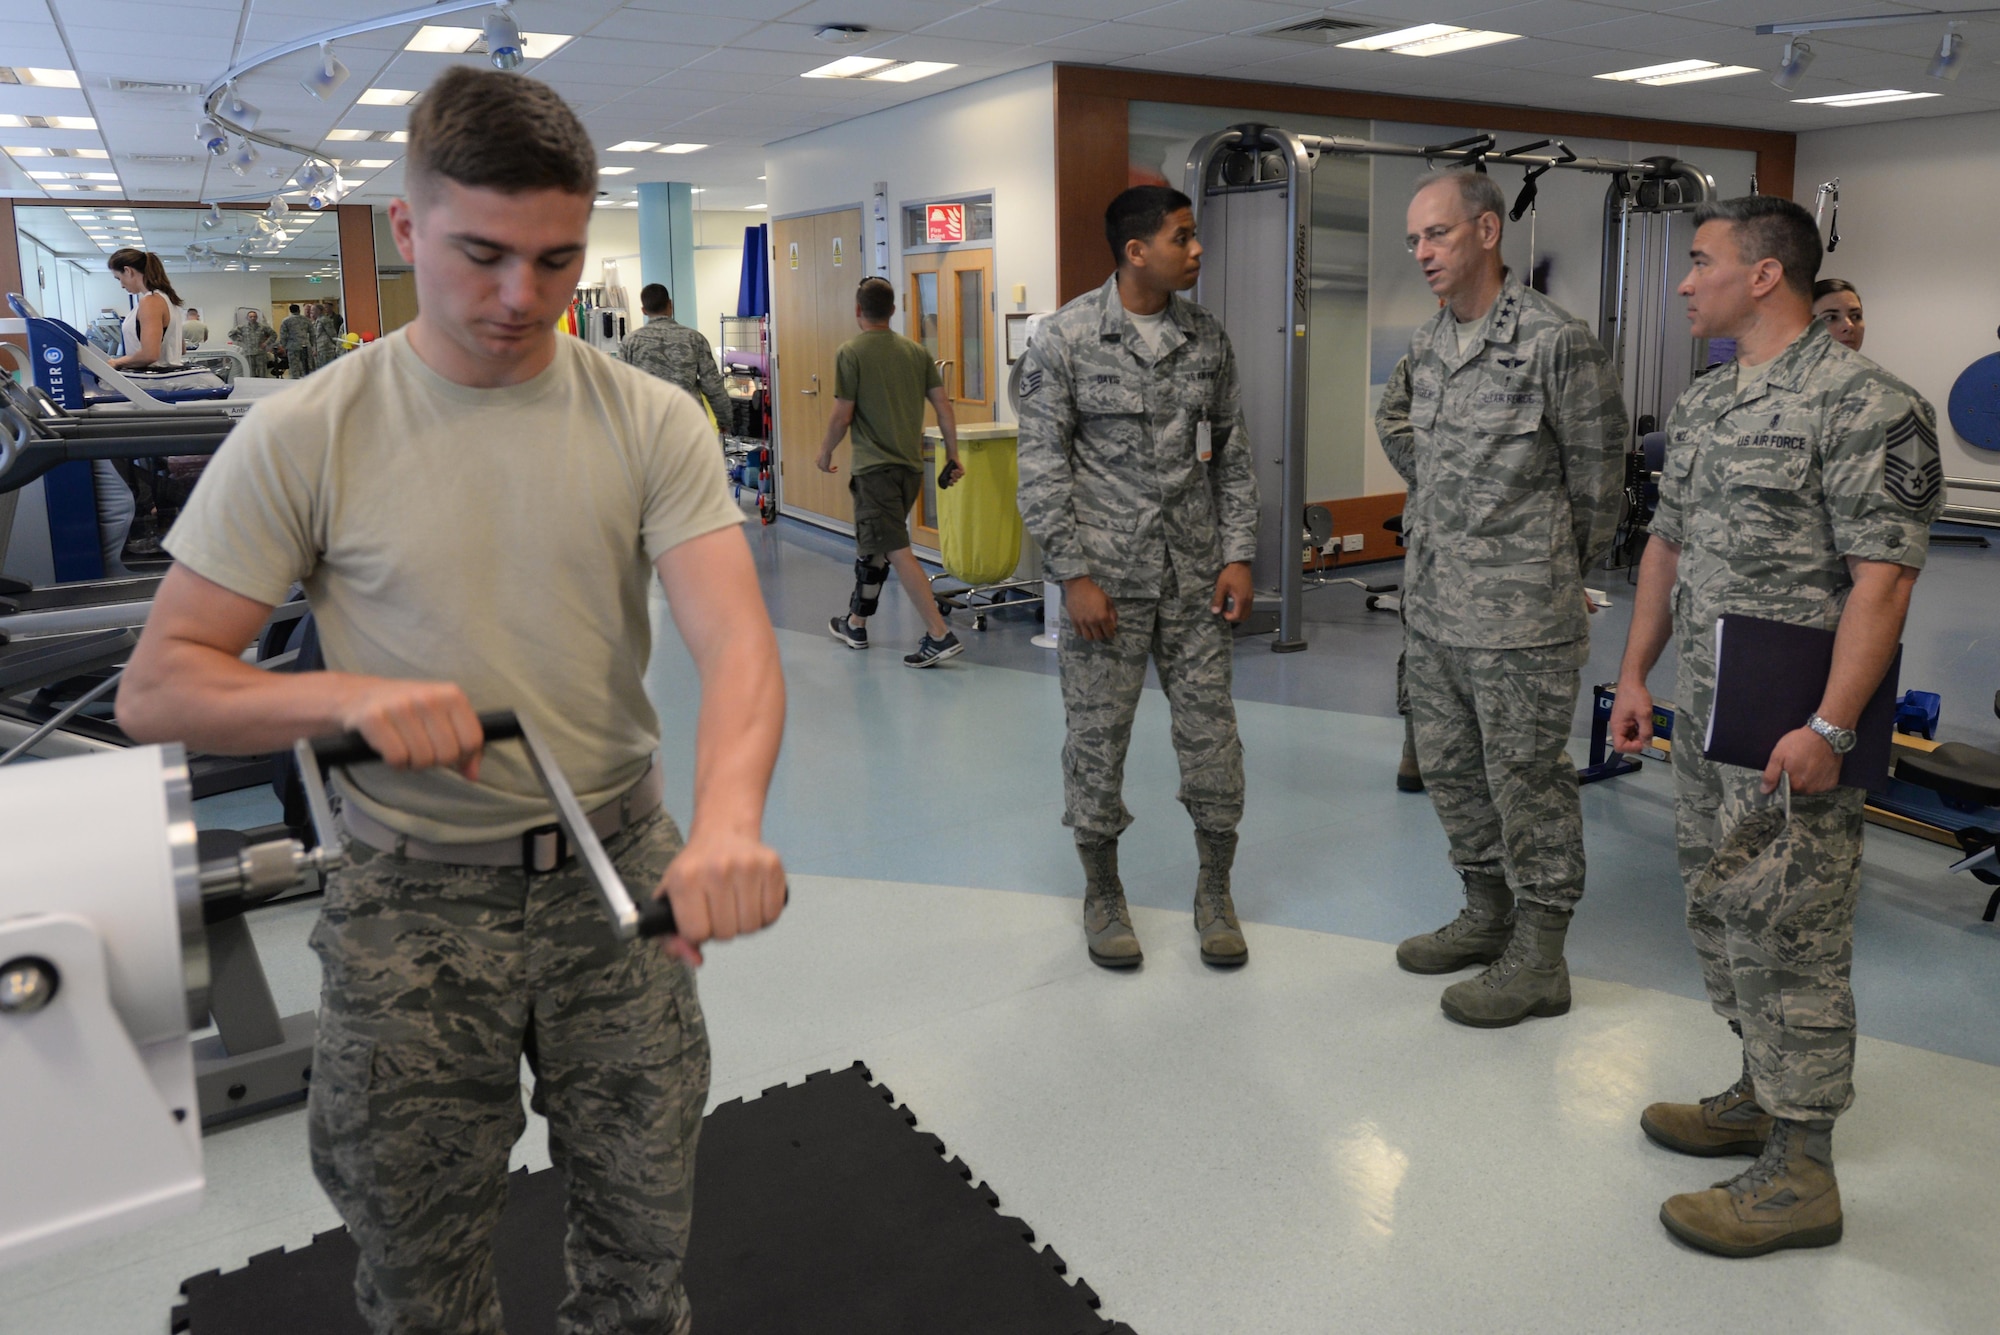 U.S. Air Force Senior Airman Daniel Dawson (left), 48th Medical Operations Squadron physical therapy assistant, demonstrates the use of a BTE machine as Staff Sgt. Macros Davis, 48th MDOS physical therapy assistant, briefs Lt. Gen. Mark A. Edigar, Surgeon General of the Air Force, and Chief Master Sgt. Jason E. Pace, Chief, Medical Enlisted Force, on the types of equipment in the 48th Medical Group’s Physical and Occupational Therapy Clinic at Royal Air Force Lakenheath, England, July 25. Ediger and Pace visited many of the 48th MDG’s facilities during their tour to engage with the Airmen and see first-hand the capabilities of the MDG. (U.S. Air Force photo/Airman Eli Chevalier)